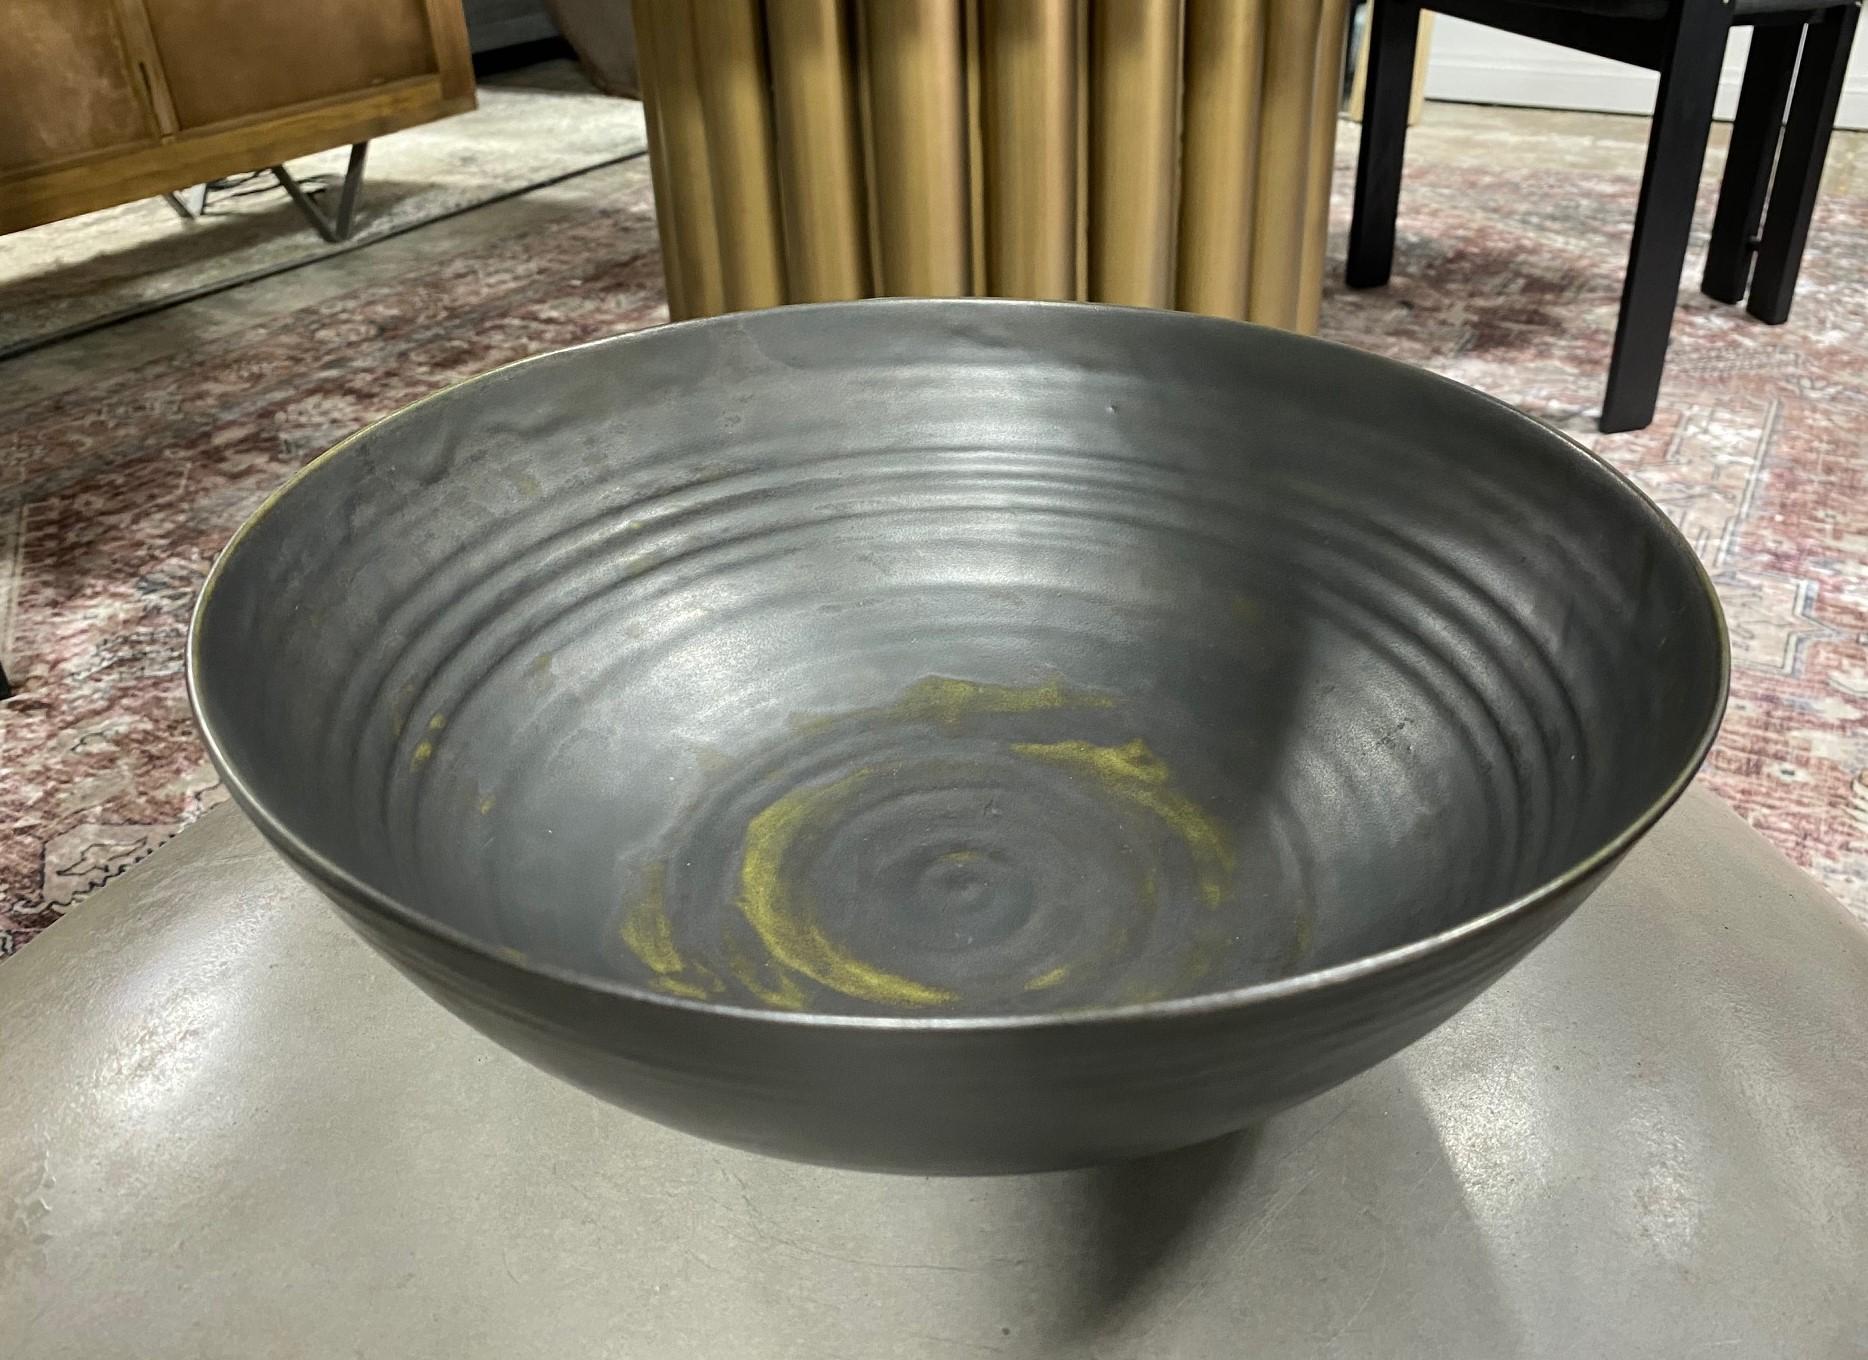 A masterful work by famed potters Otto and Gertrud Natzler. This monumentally large round-shaped footed bowl was wheel thrown and formed by Gertrud and glazed by Otto with a rare matte black glaze with hints of avocado green working their way to the